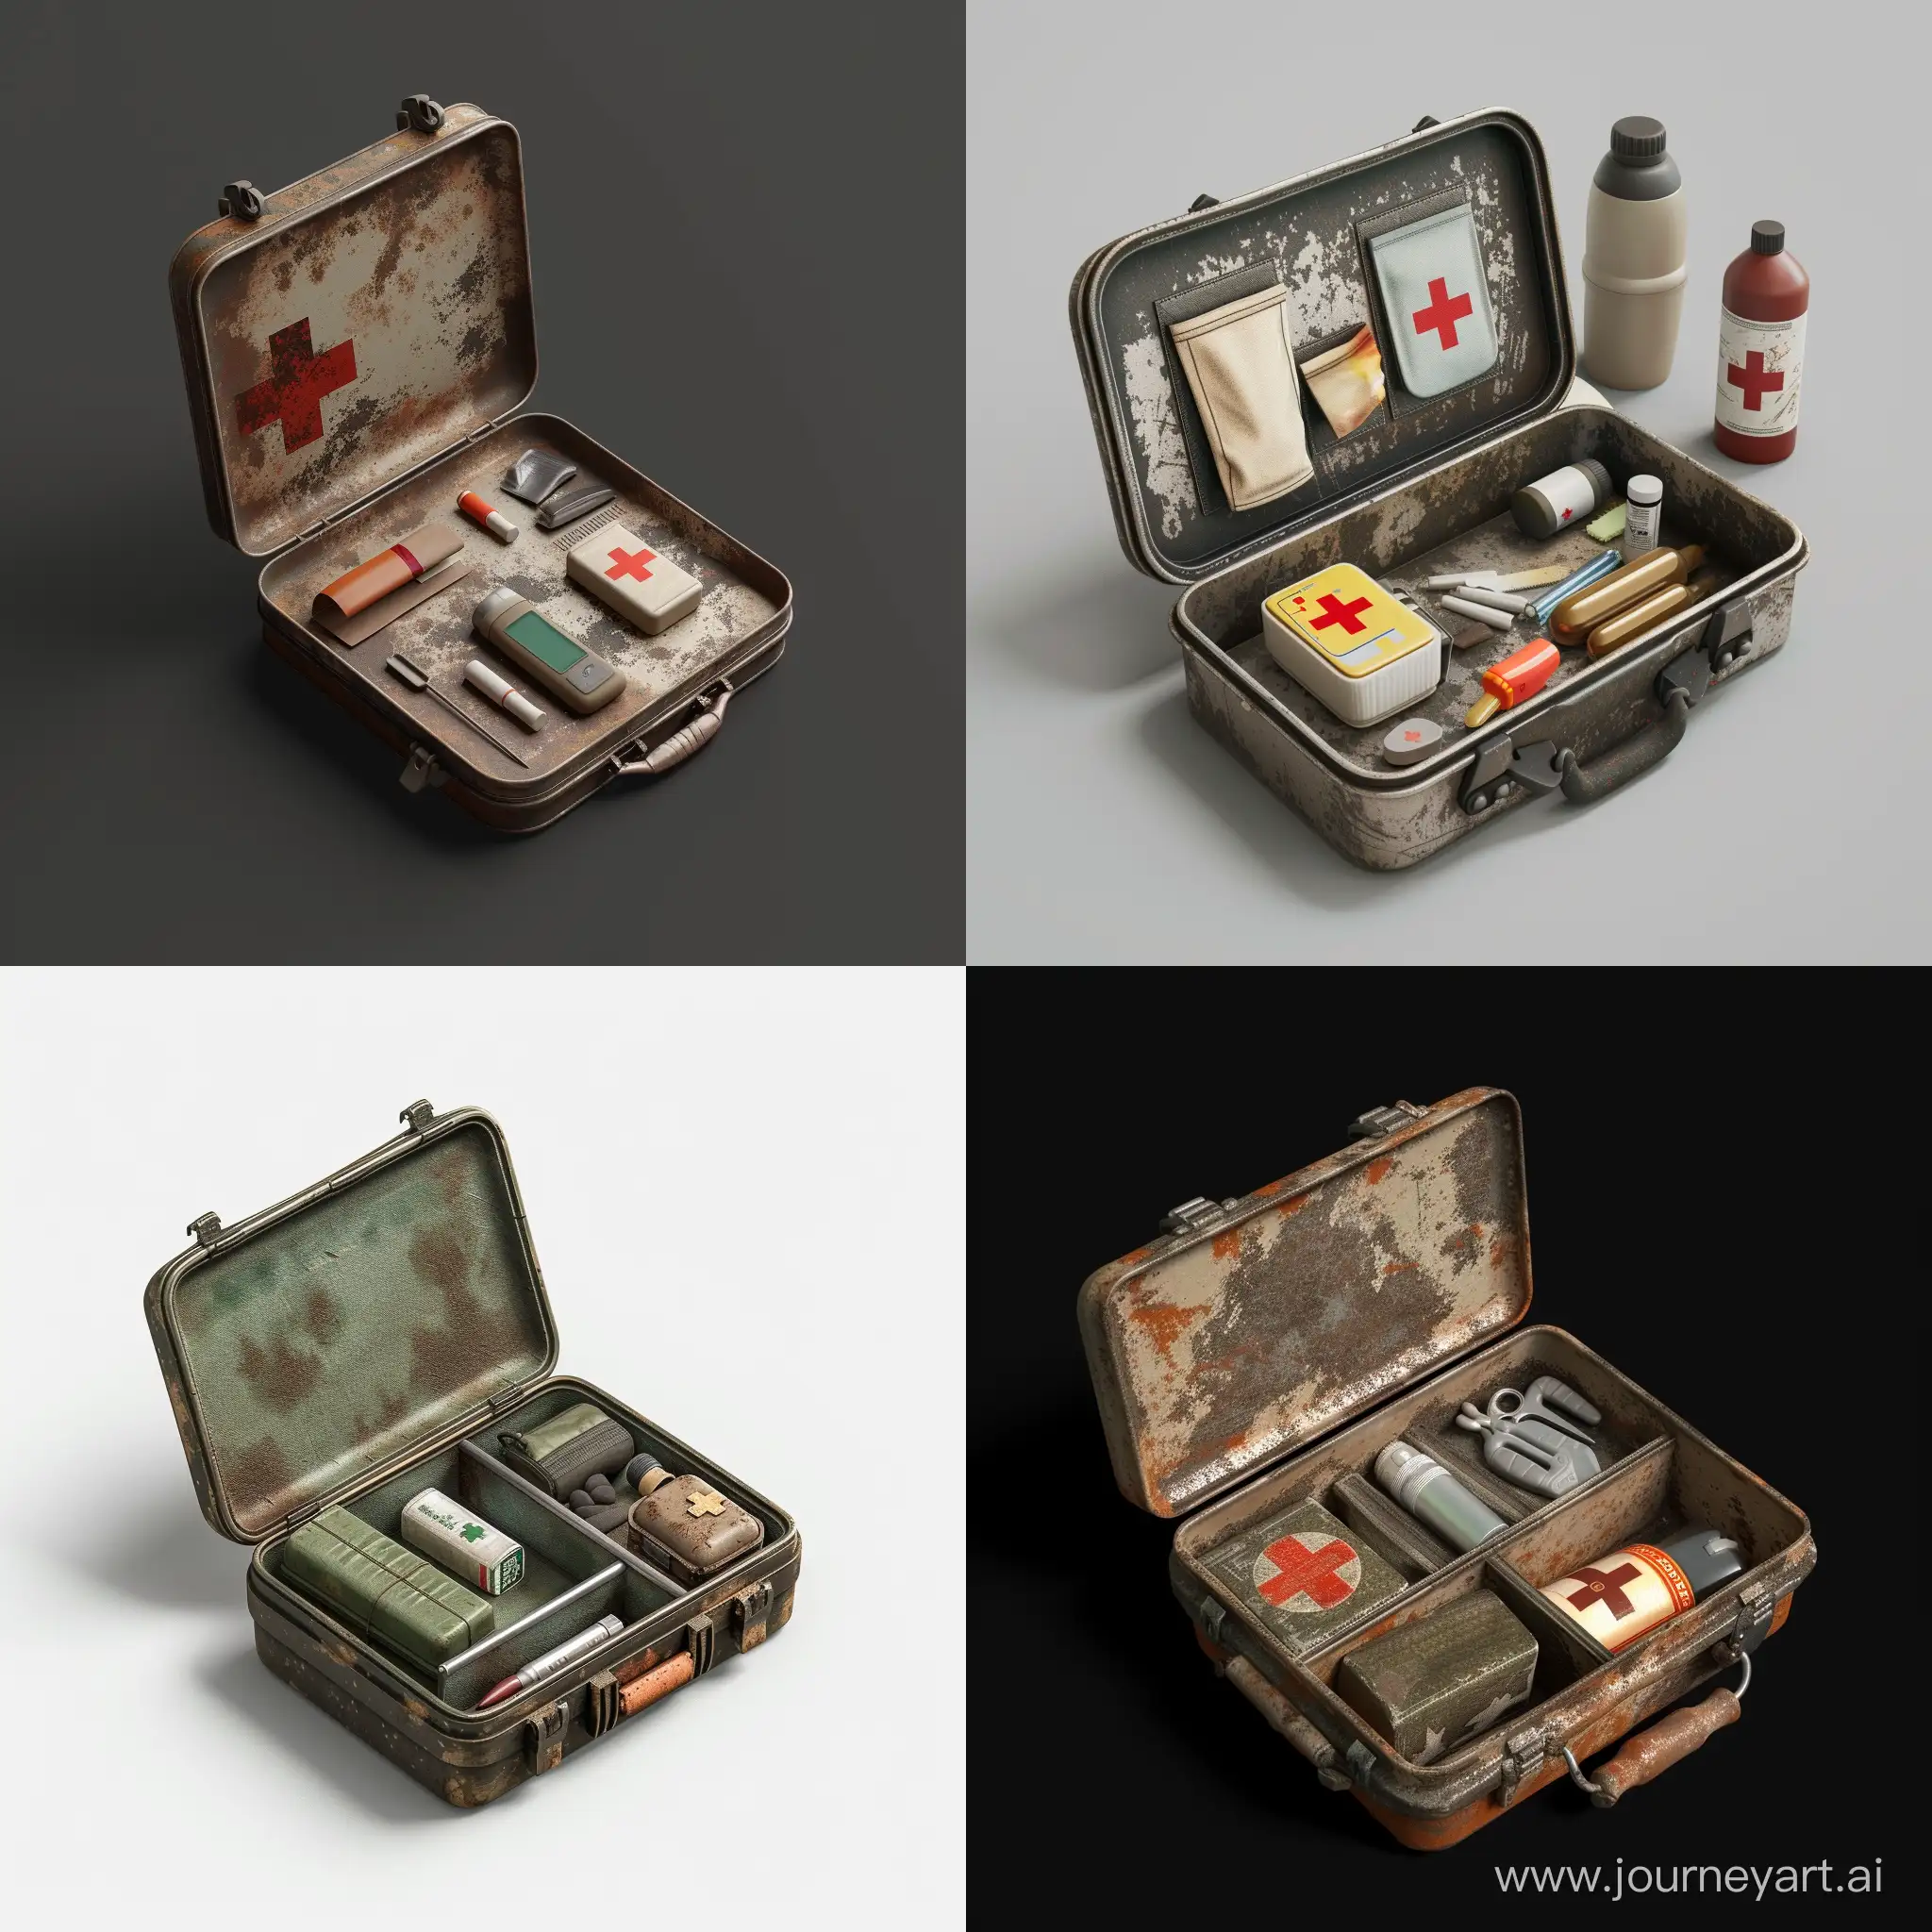 isometric realistic mini very small simple opened survival kit in realistic worn metal case, 3d render, stalker style, less details, hunting first aid, hygiene